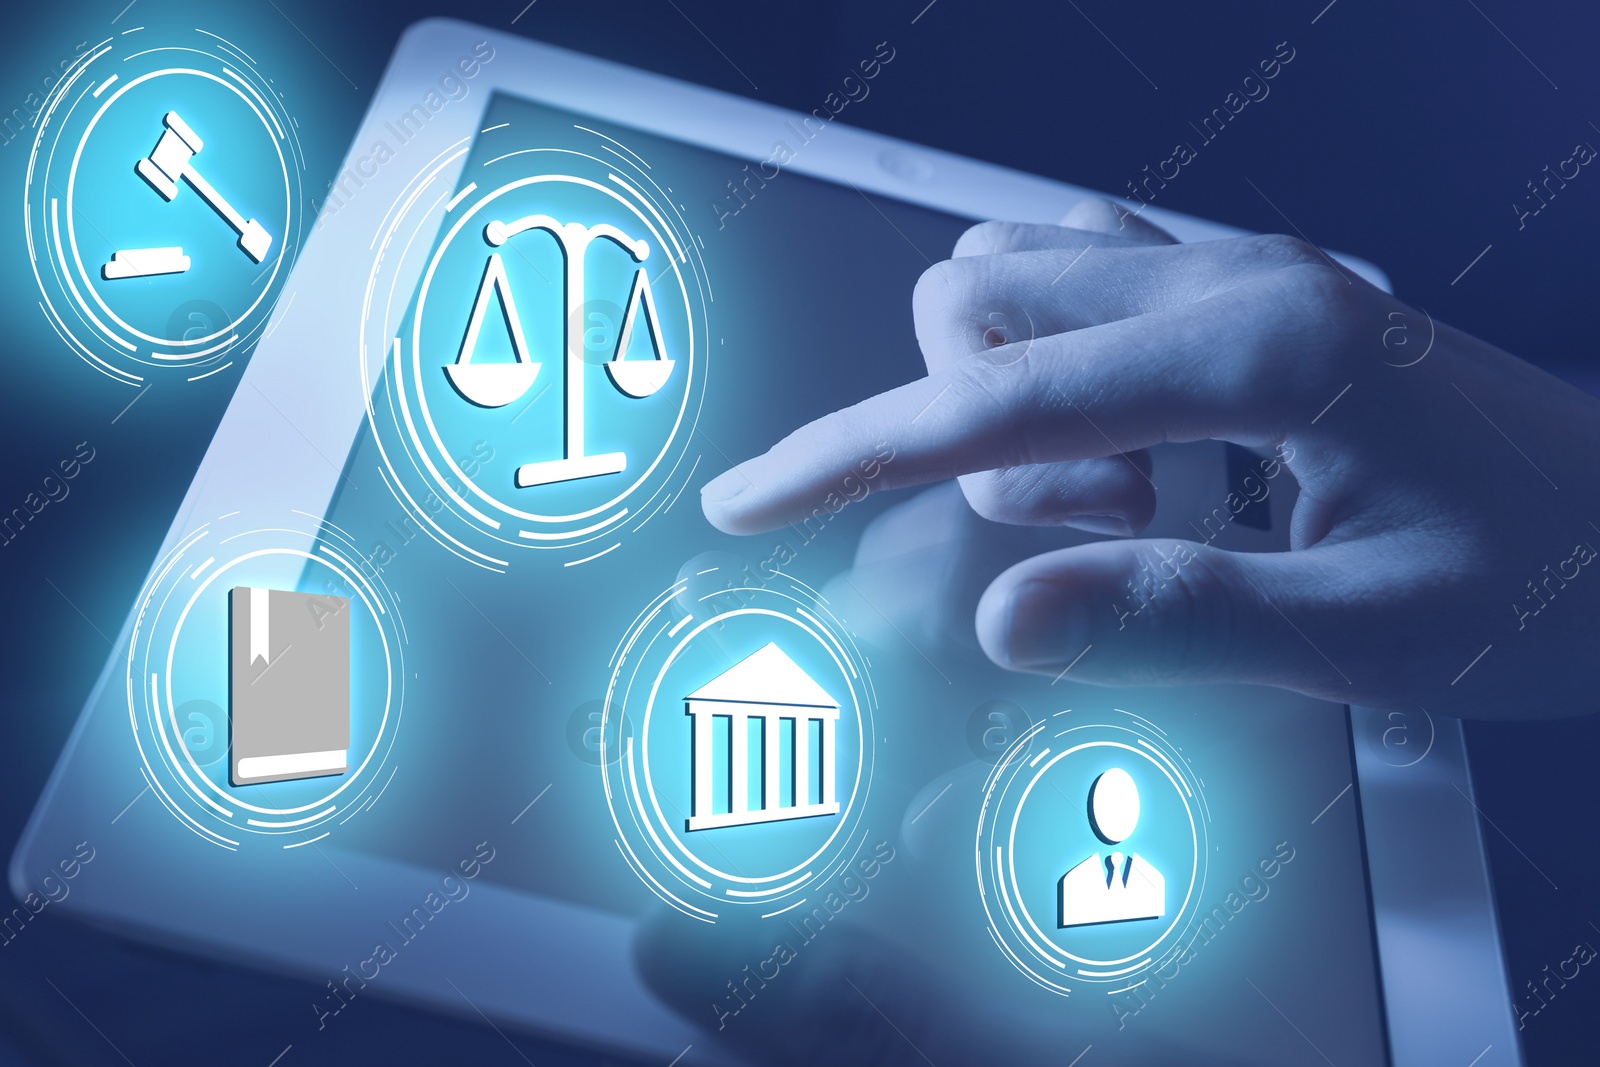 Image of Laws, legal information and online consultation. Woman using tablet, closeup. Icons over device